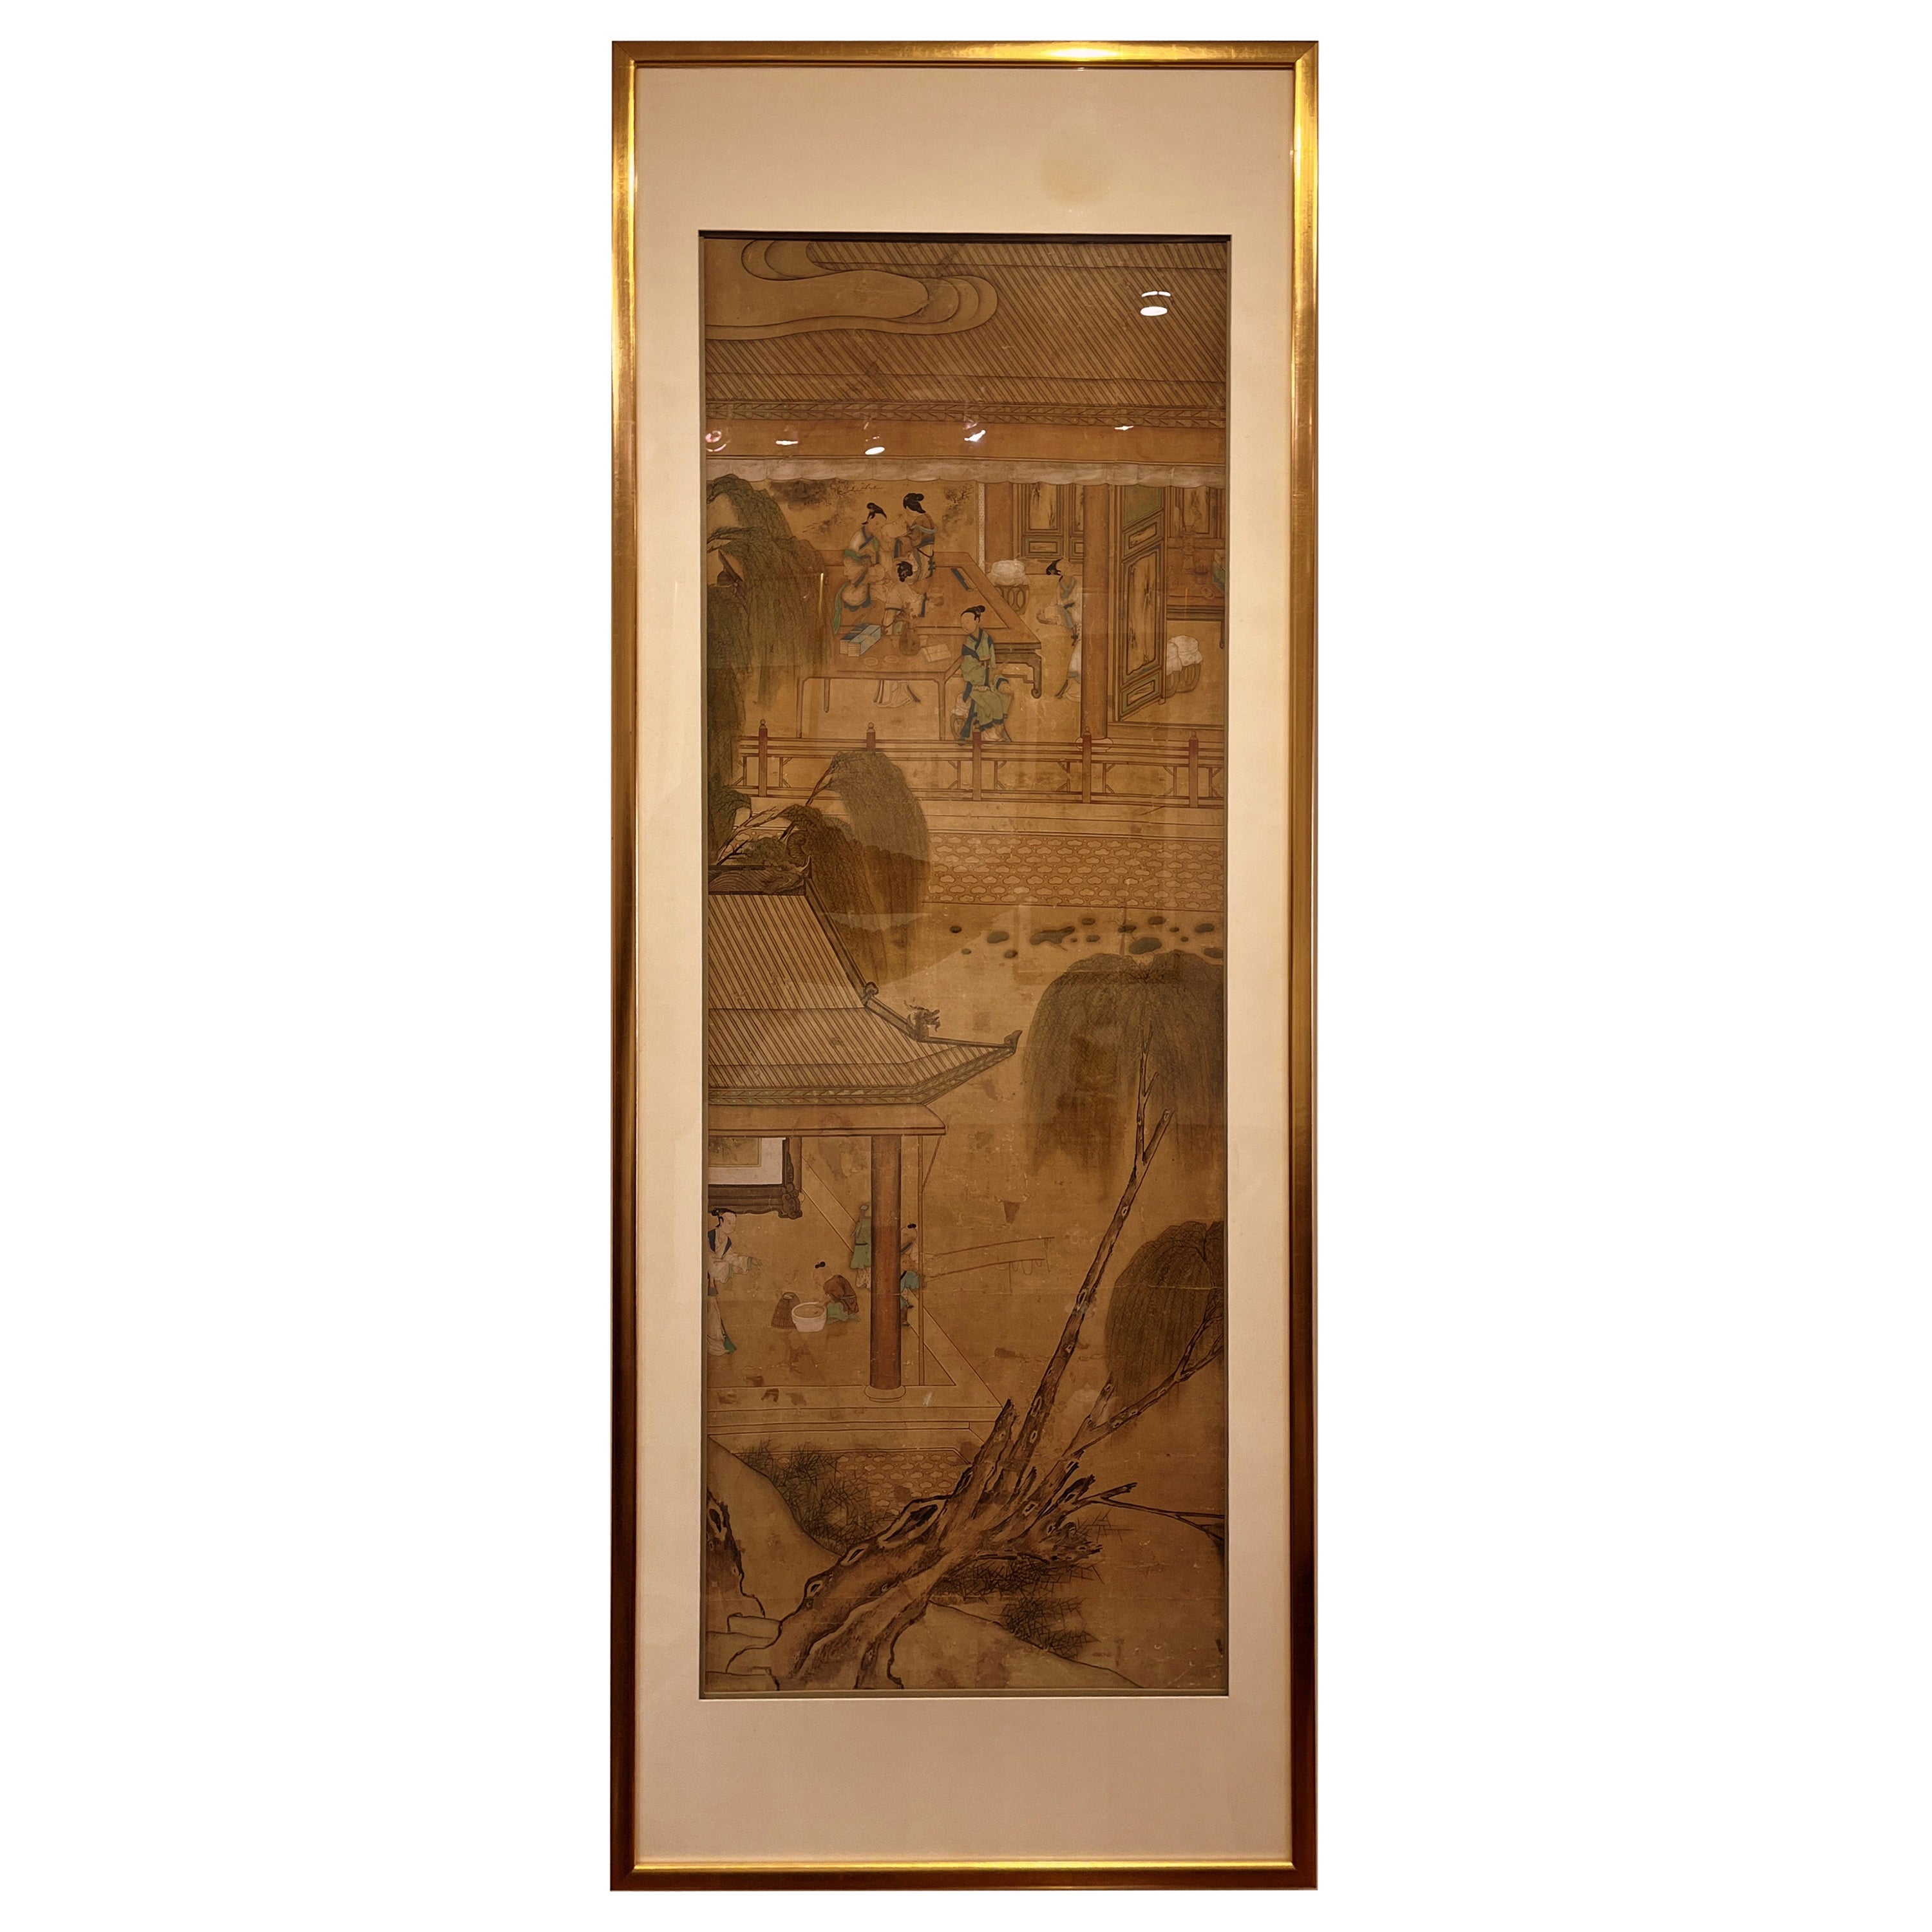 Chinese brush painting of women and children at leisure in the garden For Sale